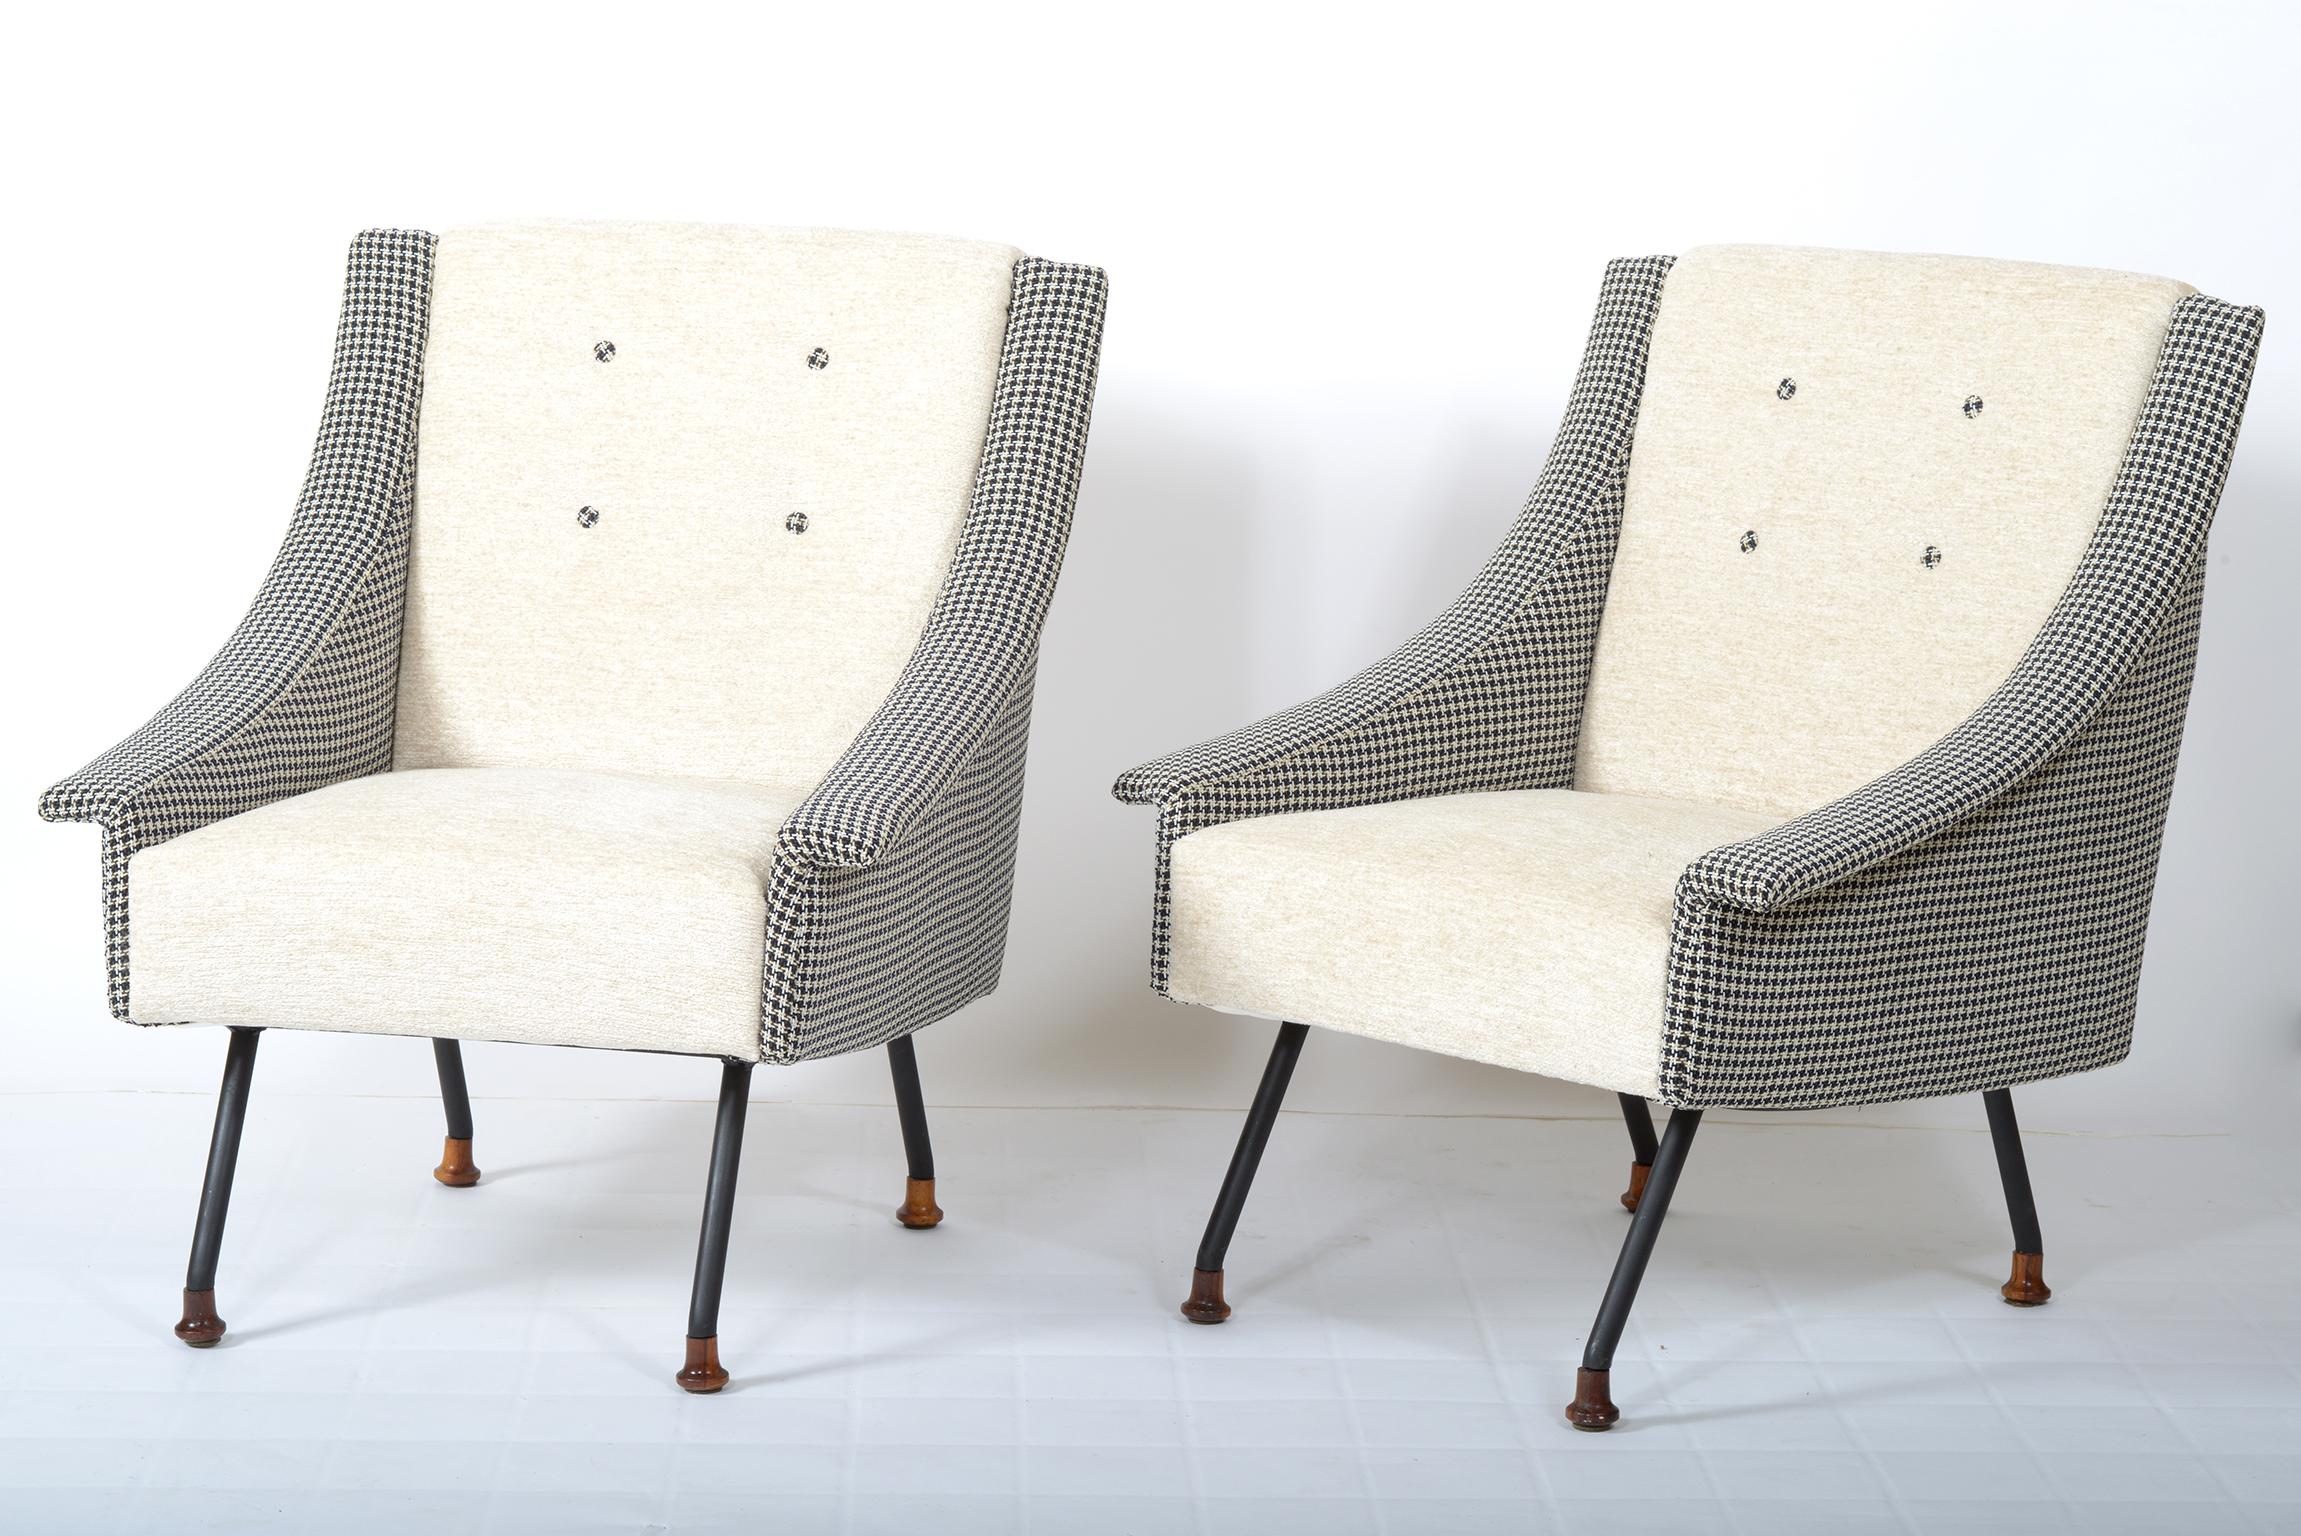 Pair of early 1960s armchairs with sliding armrests legs in black lacquered metal ending with feet in carved solid walnut, executed by F.lli Galimberti -Cantù Milano Italy in the midcentury.
Recently covered with pied de poule cotton fabric in